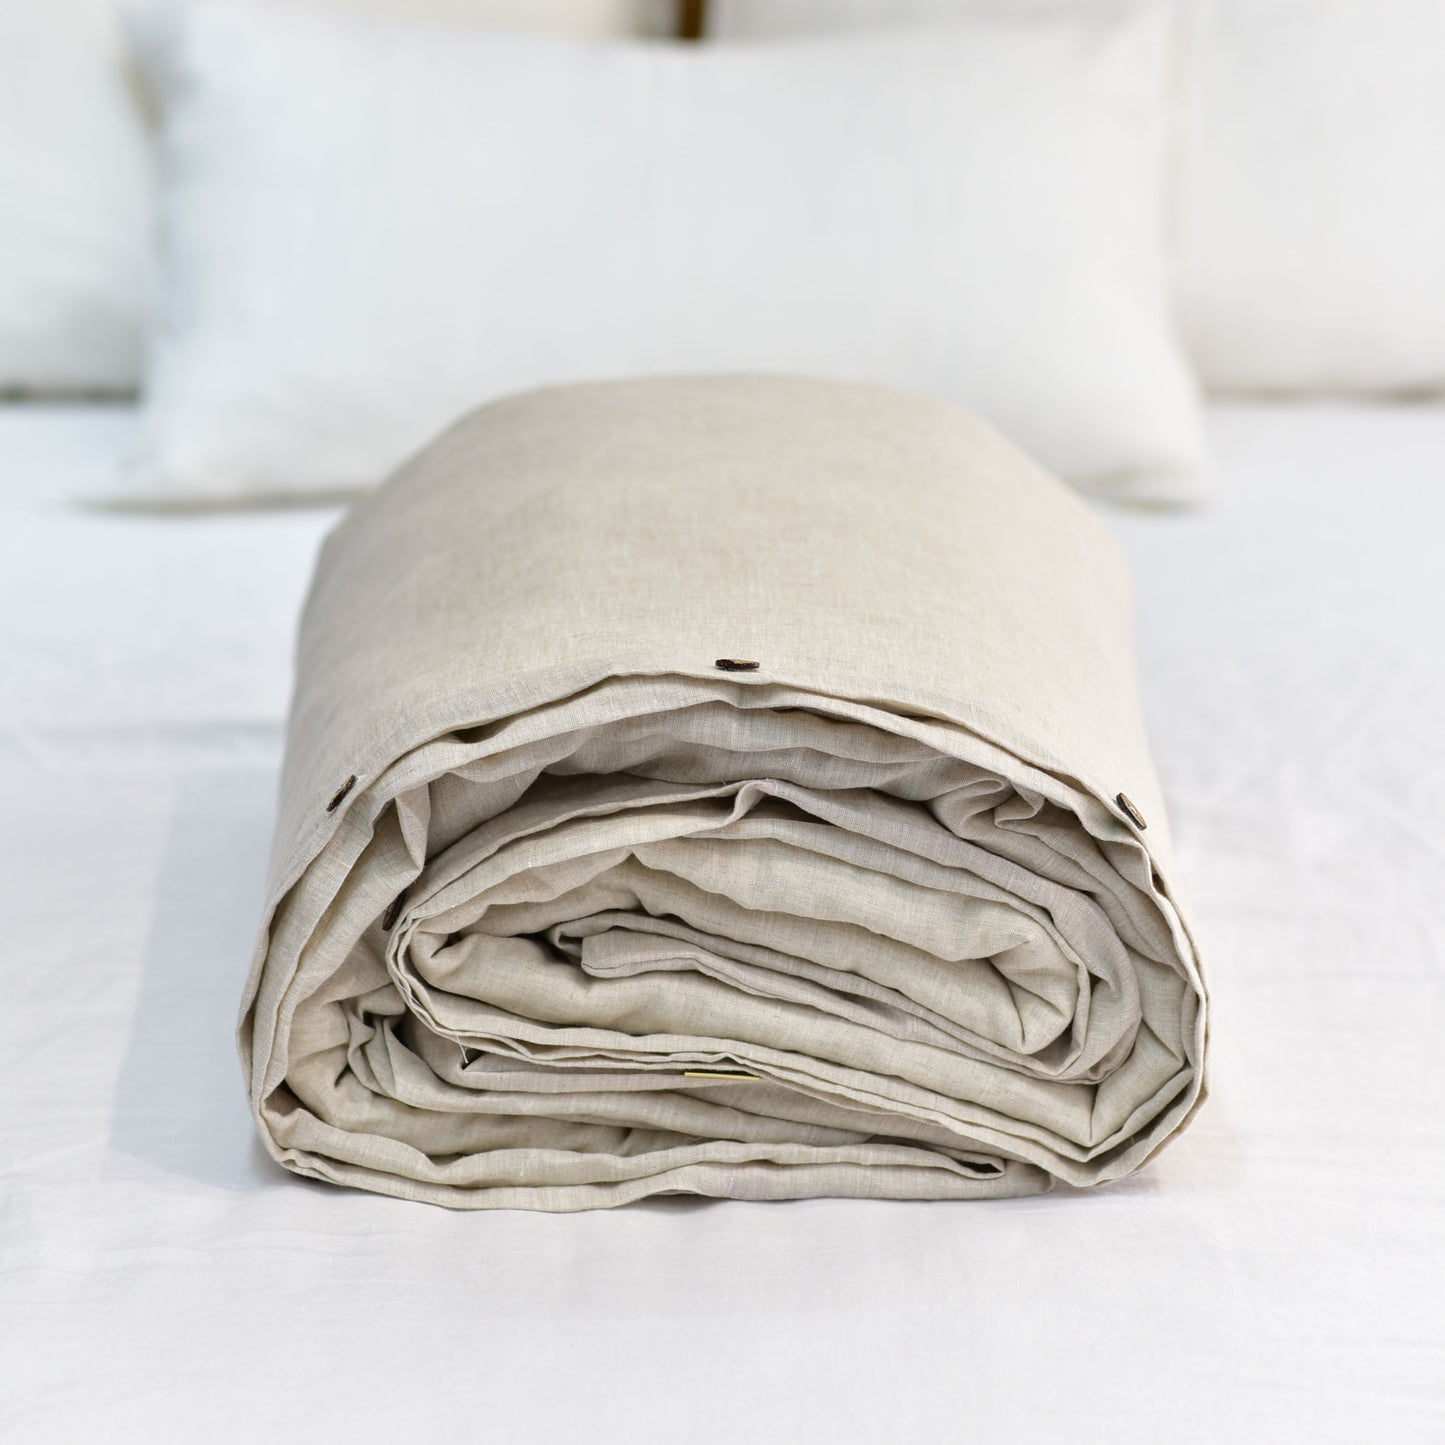 Flax French Linen Duvet Cover - Plain Dyeing 07